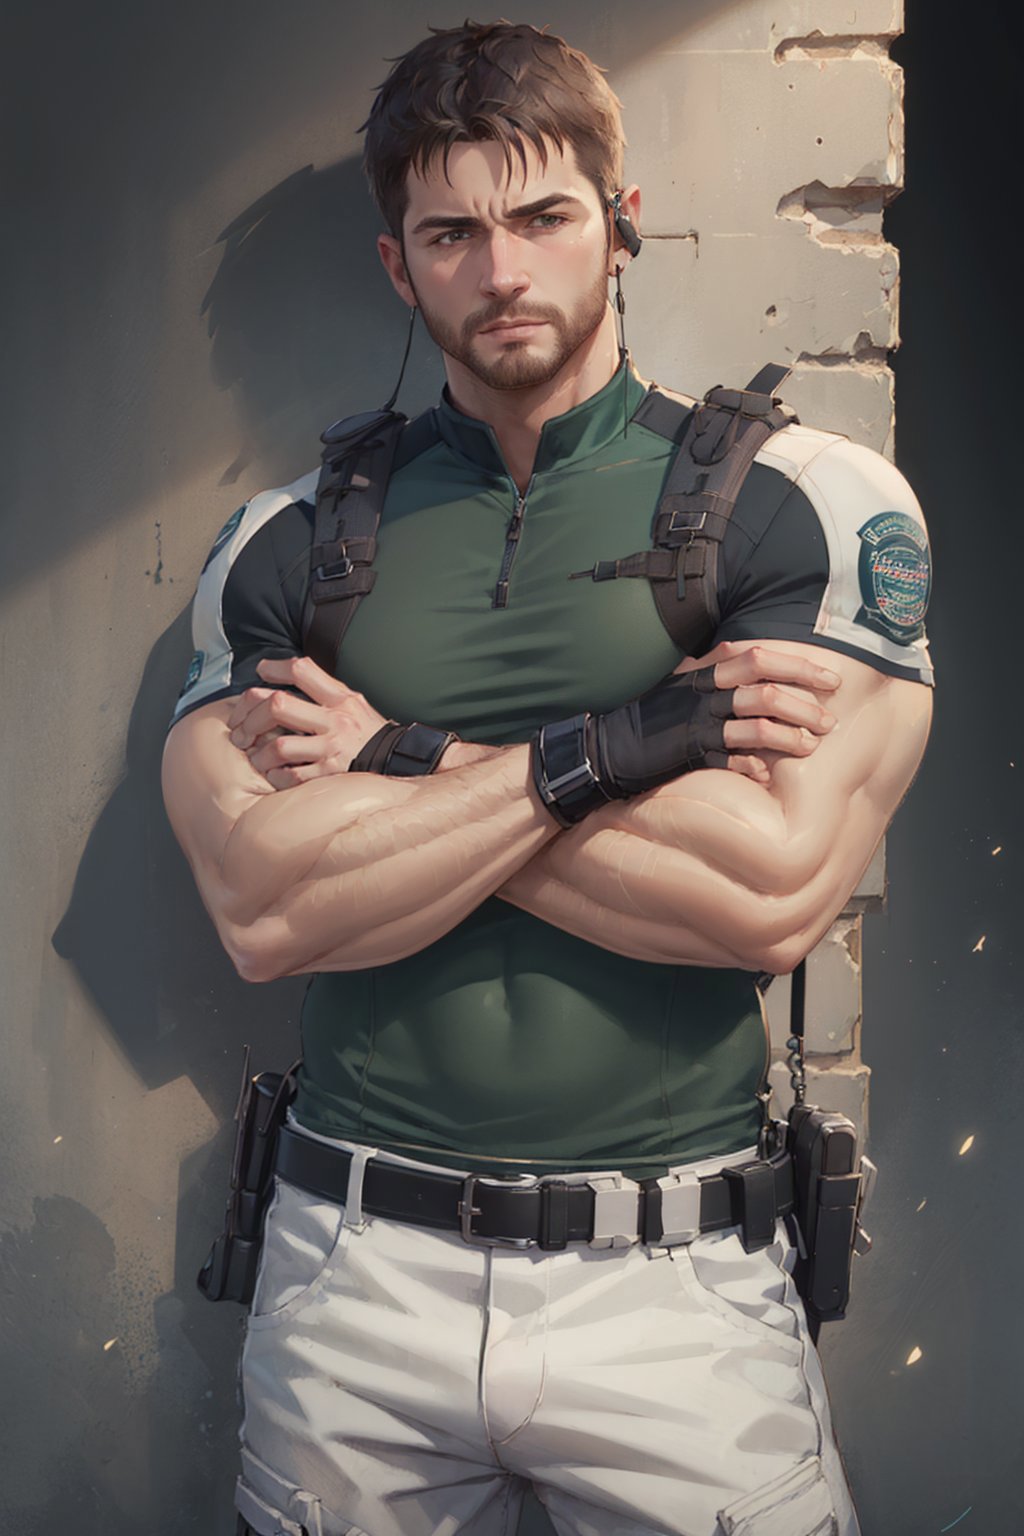 Chris Redfield | Resident Evil image by justTNP